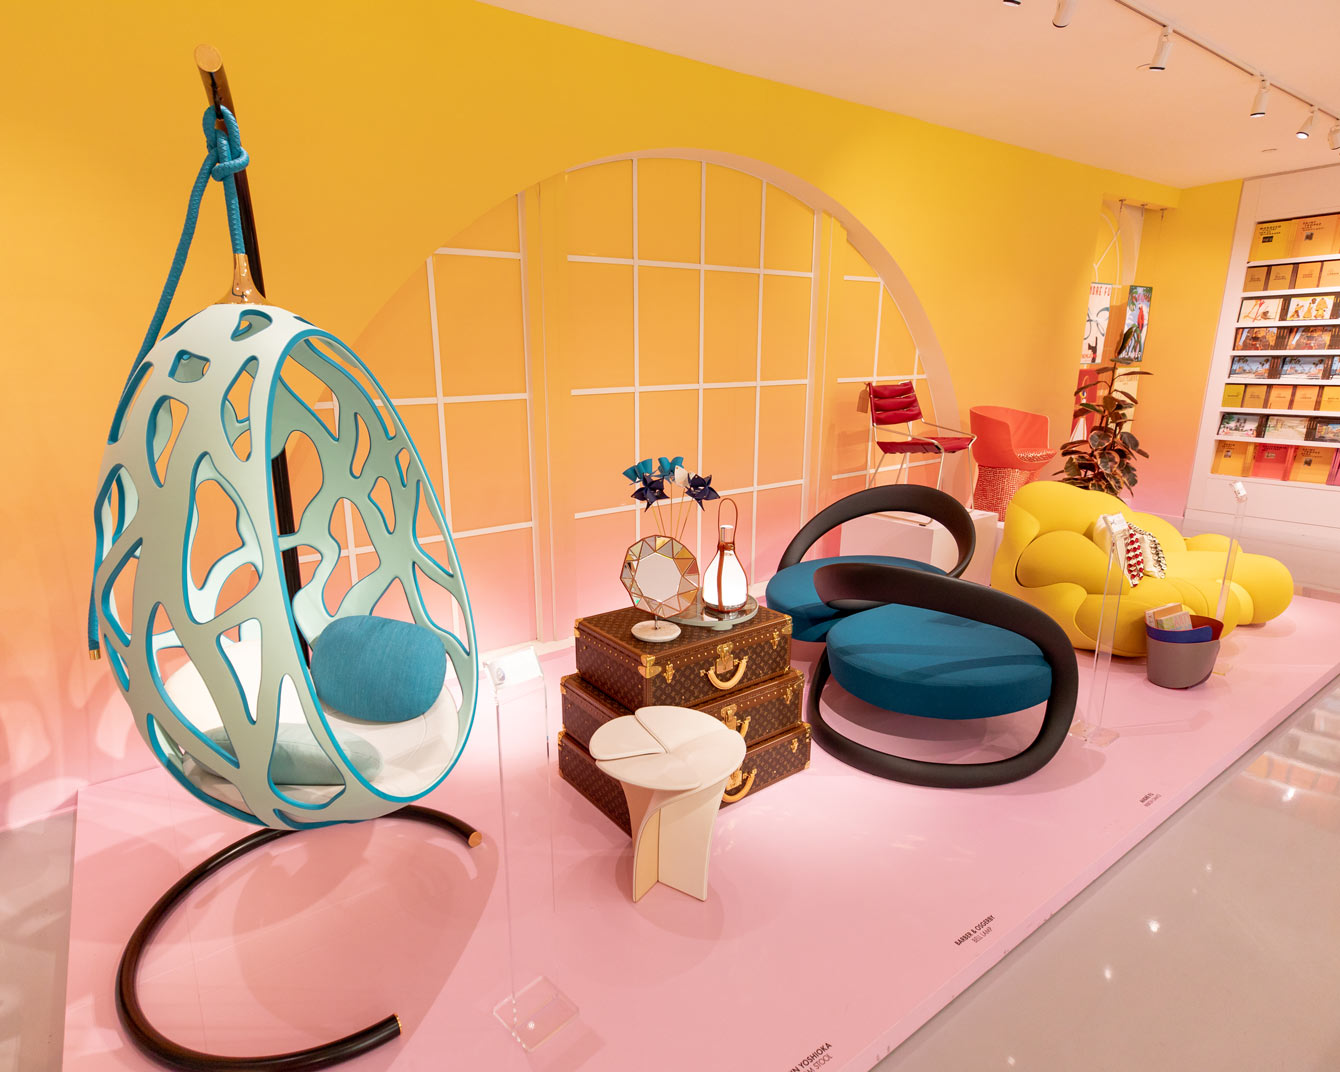 Louis Vuitton Returns to Rodeo Drive With a Whimsical New Pop-up